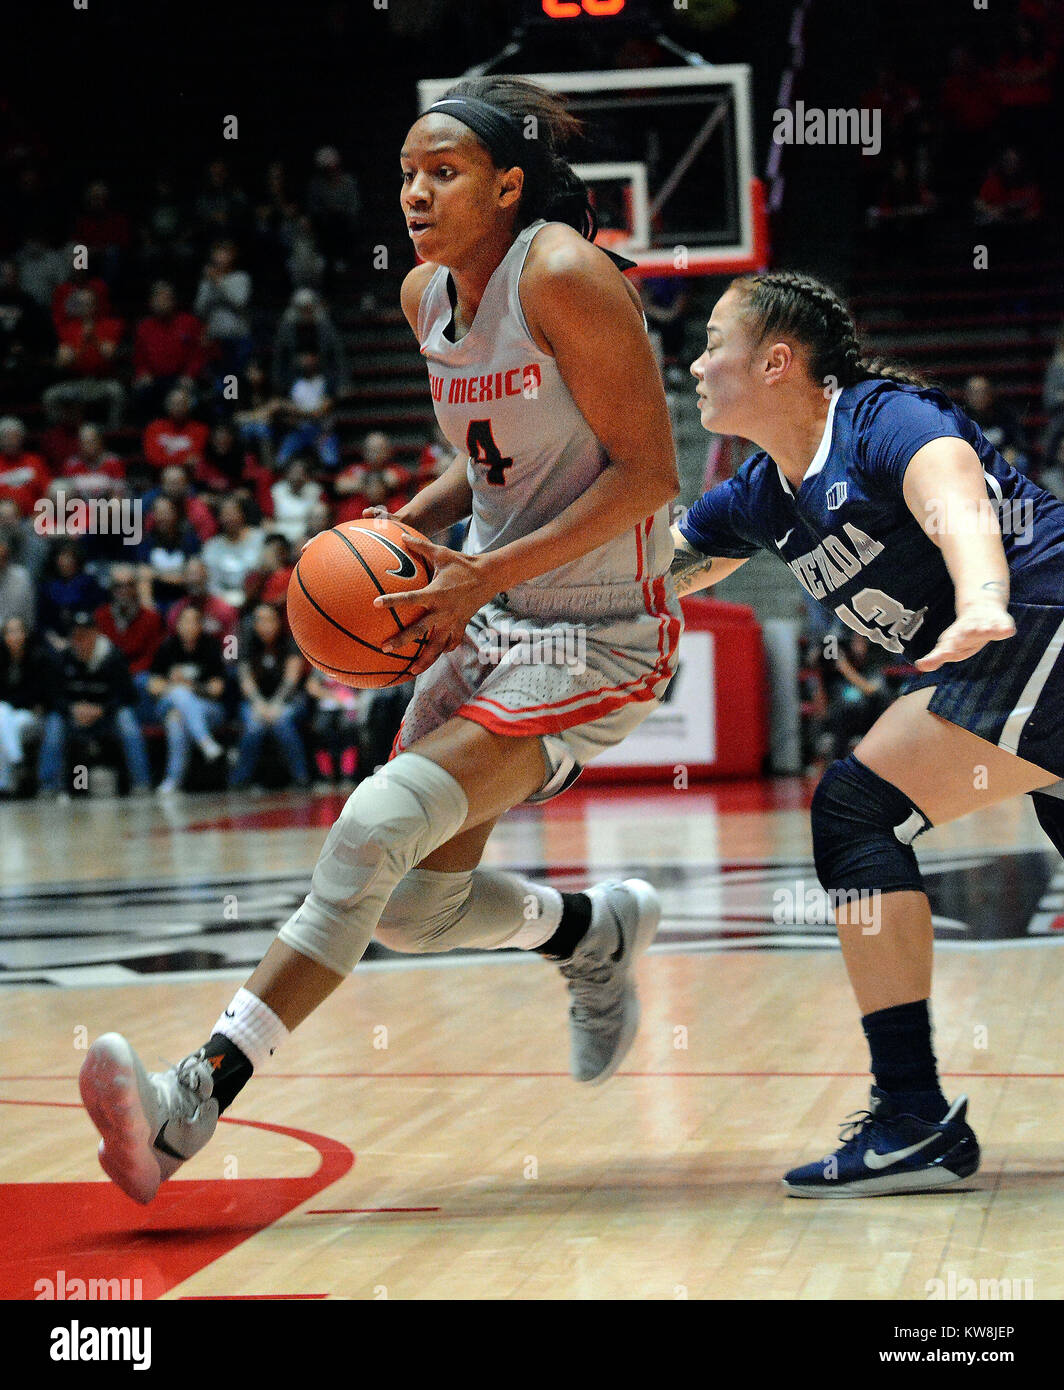 Albuquerque, NM, USA. 30th Dec, 2017. UNM's # 4 Alex Lapeyrolerie drives into the paint against Nevada's # 13 T Moe in their game Saturday afternoon in the Pit. Saturday, Dec. 30, 2017. Credit: Jim Thompson/Albuquerque Journal/ZUMA Wire/Alamy Live News Stock Photo